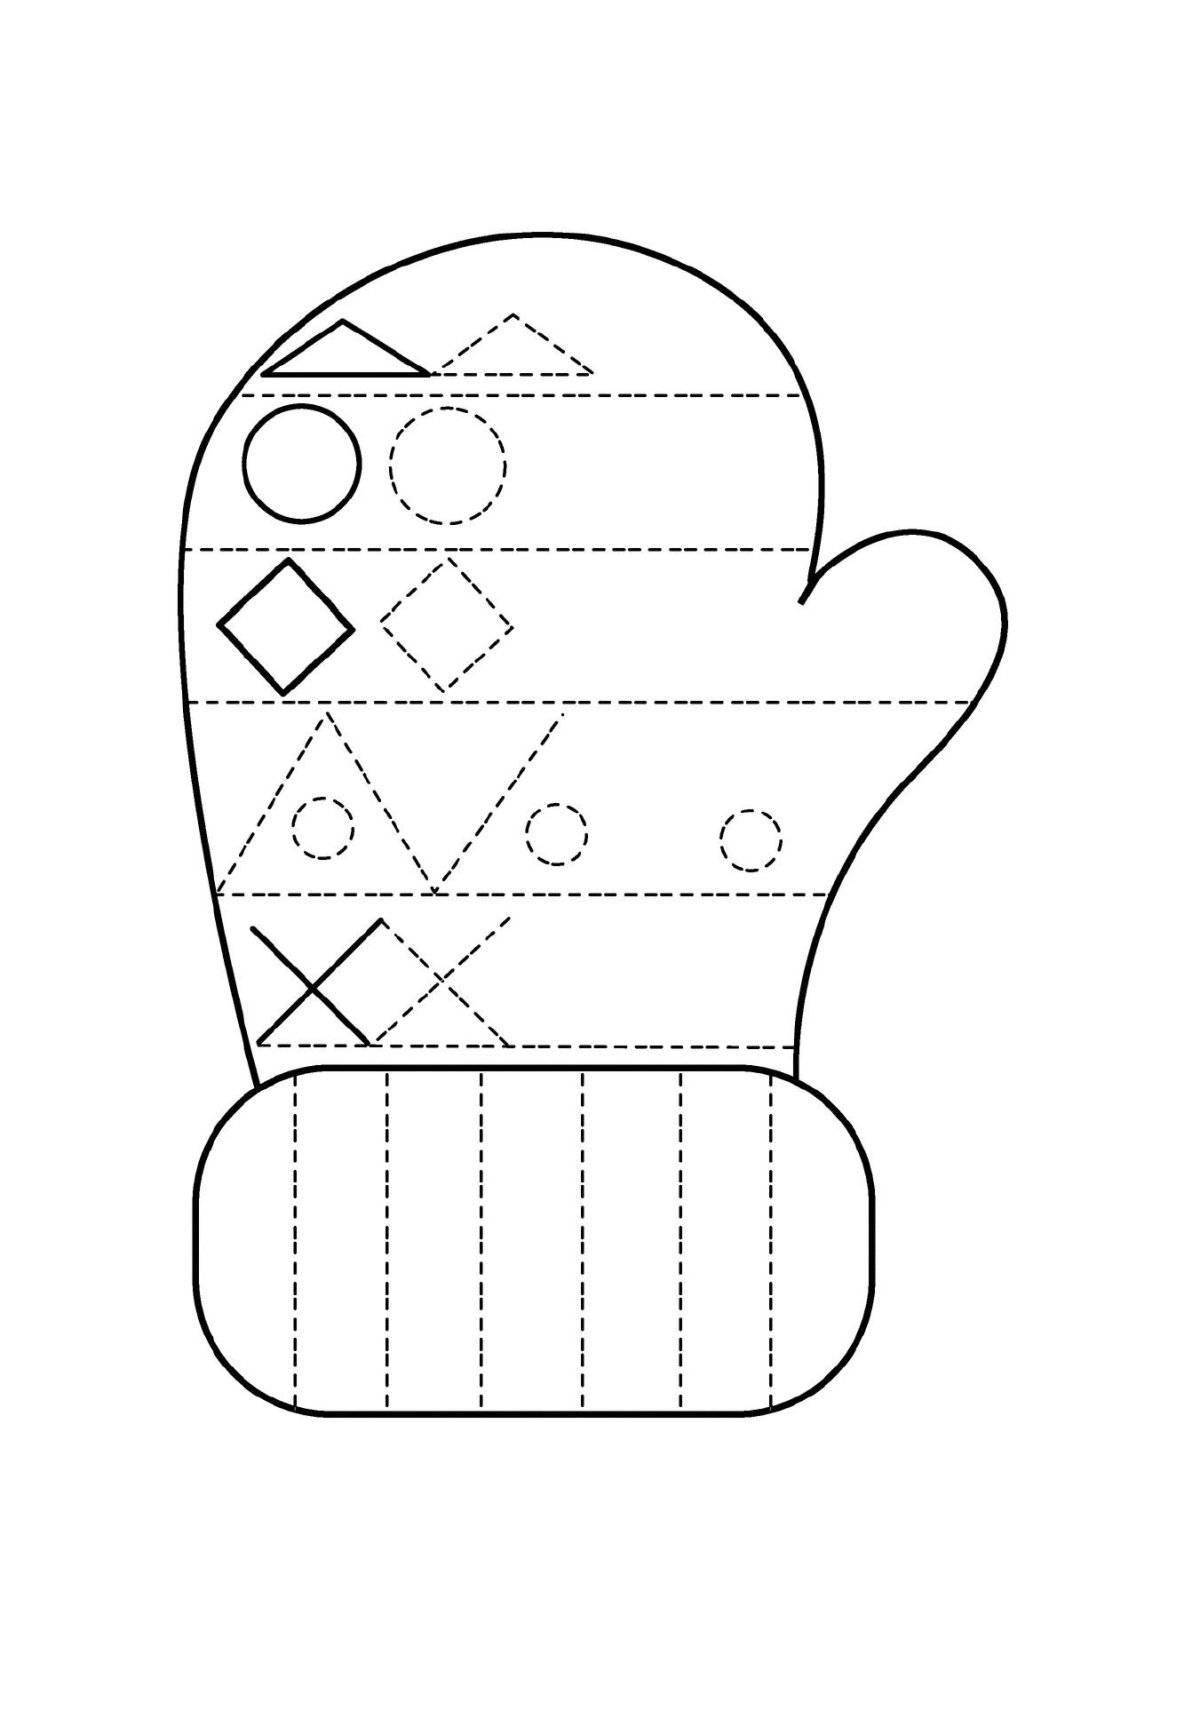 Fun mittens coloring book for 4-5 year olds